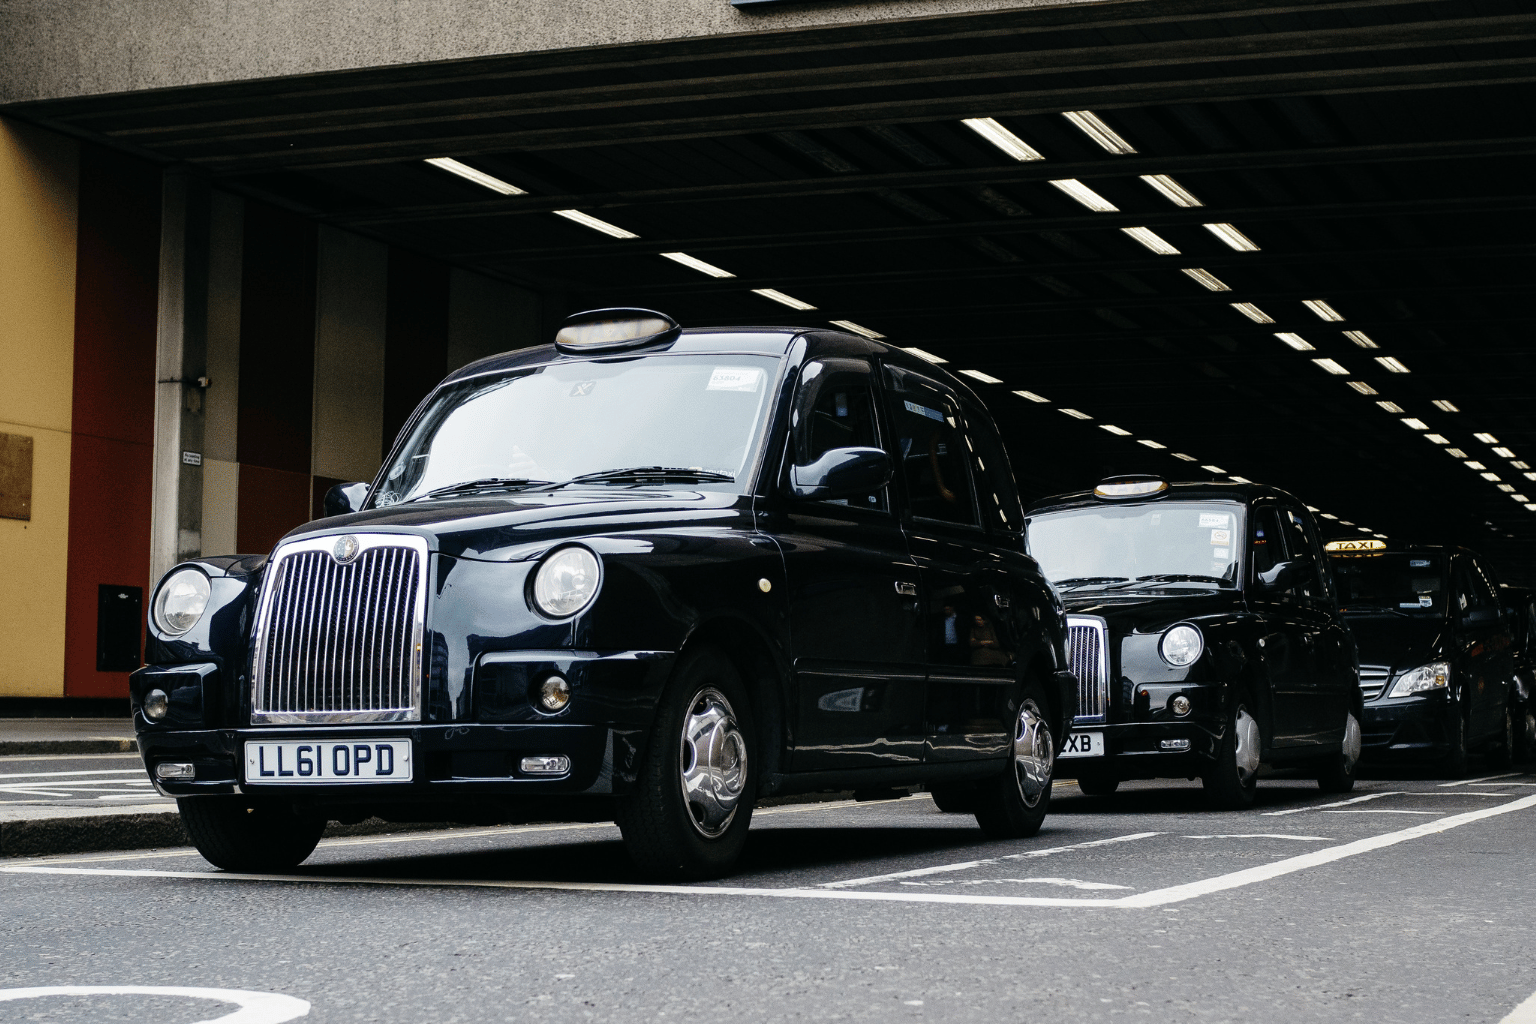 Getting Insurance For your Taxi Business